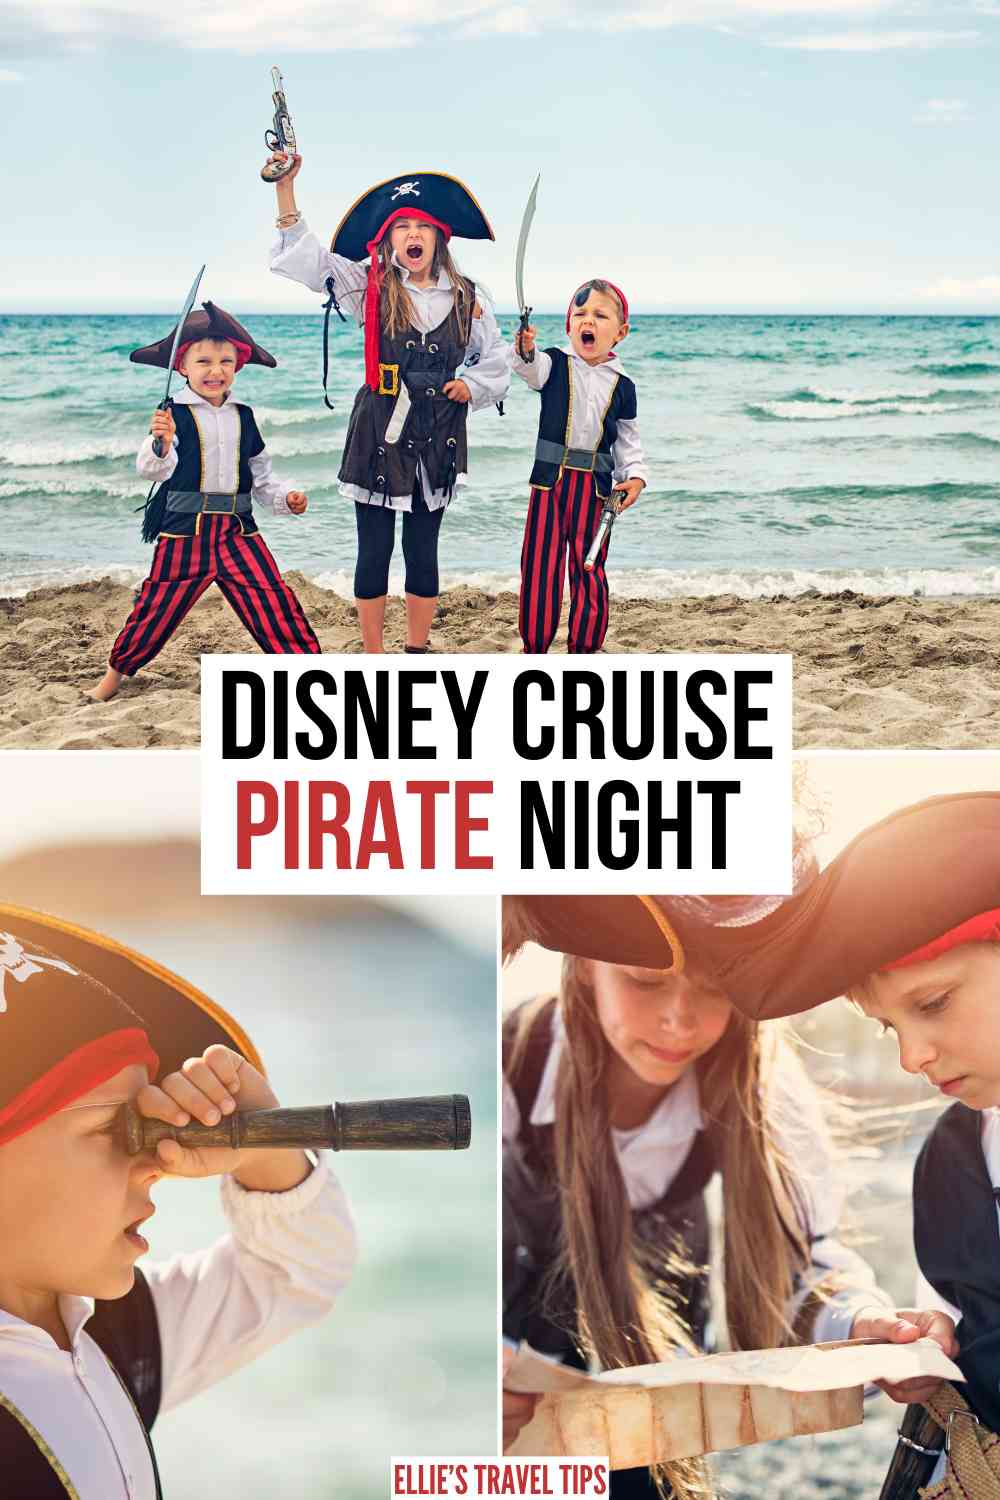 Disney Cruise Pirate Night - The Ultimate Guide - EverythingMouse